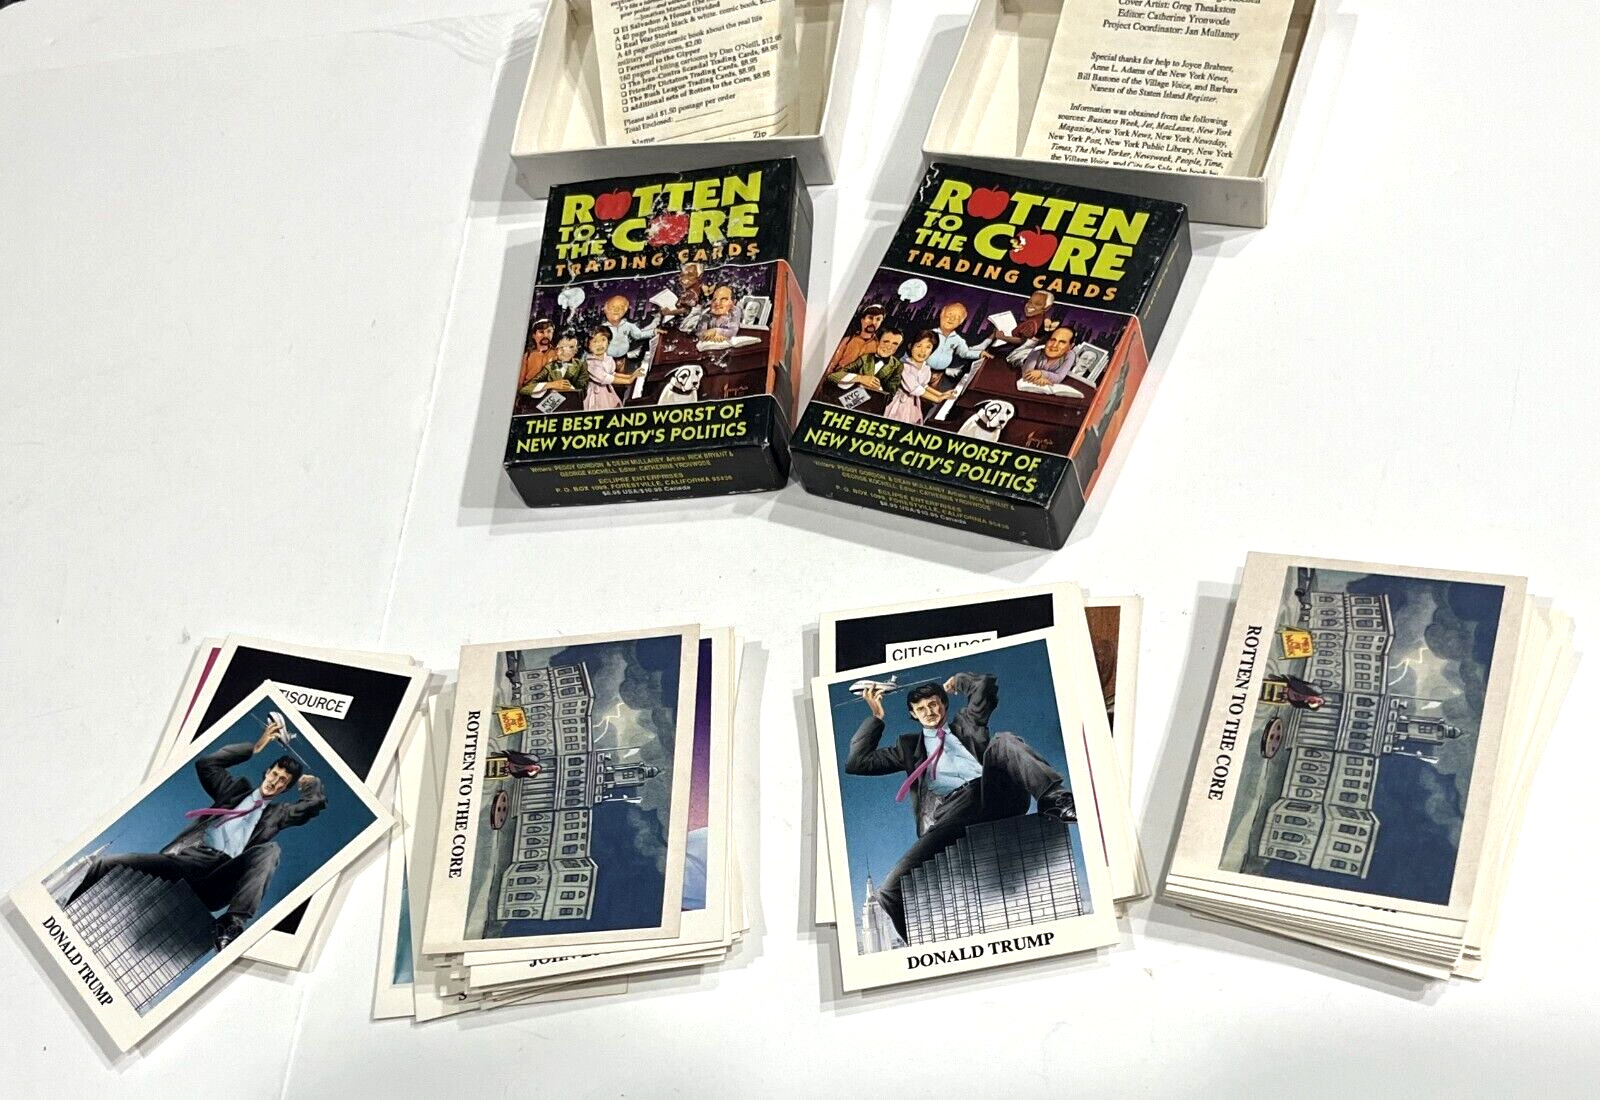 DONALD TRUMP Rookie Card 1989 Rotten Core Complete Set 1-36 Trading Cards 2 Sets